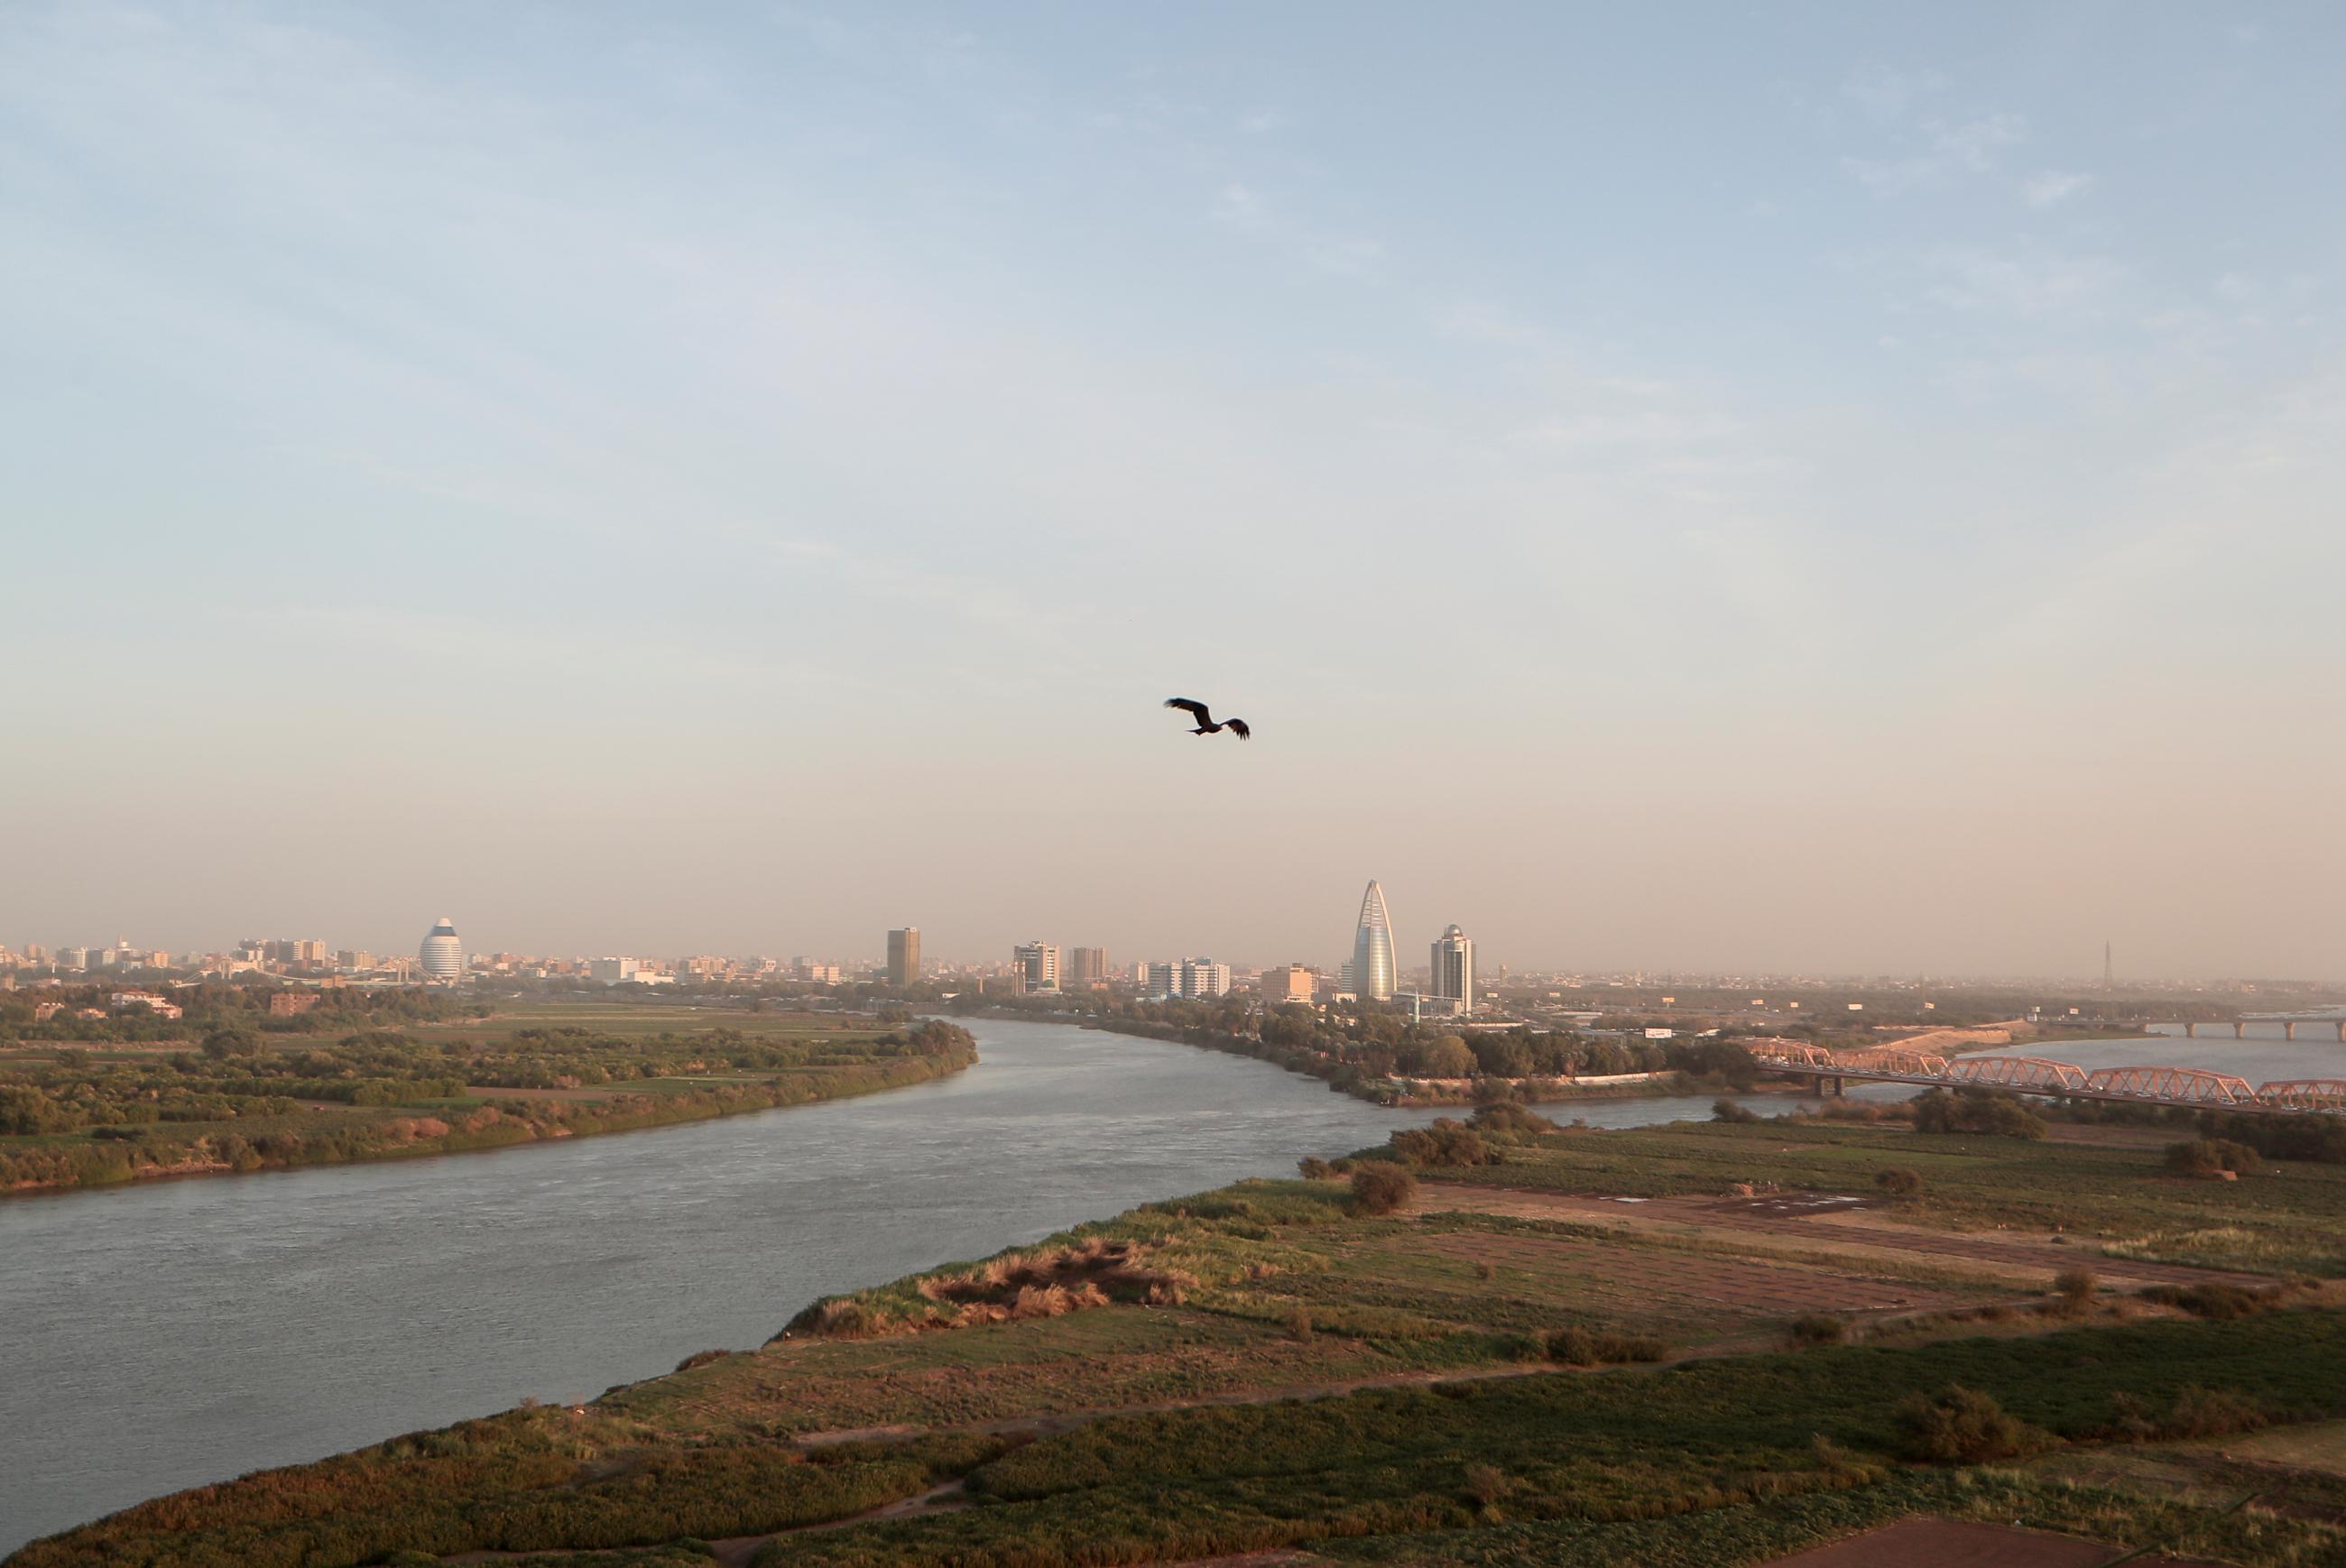 A bird flies over the convergence between the White Nile River and Blue Nile River in Khartoum, Sudan, on February 17, 2020. REUTERS/Zohra Bensemra